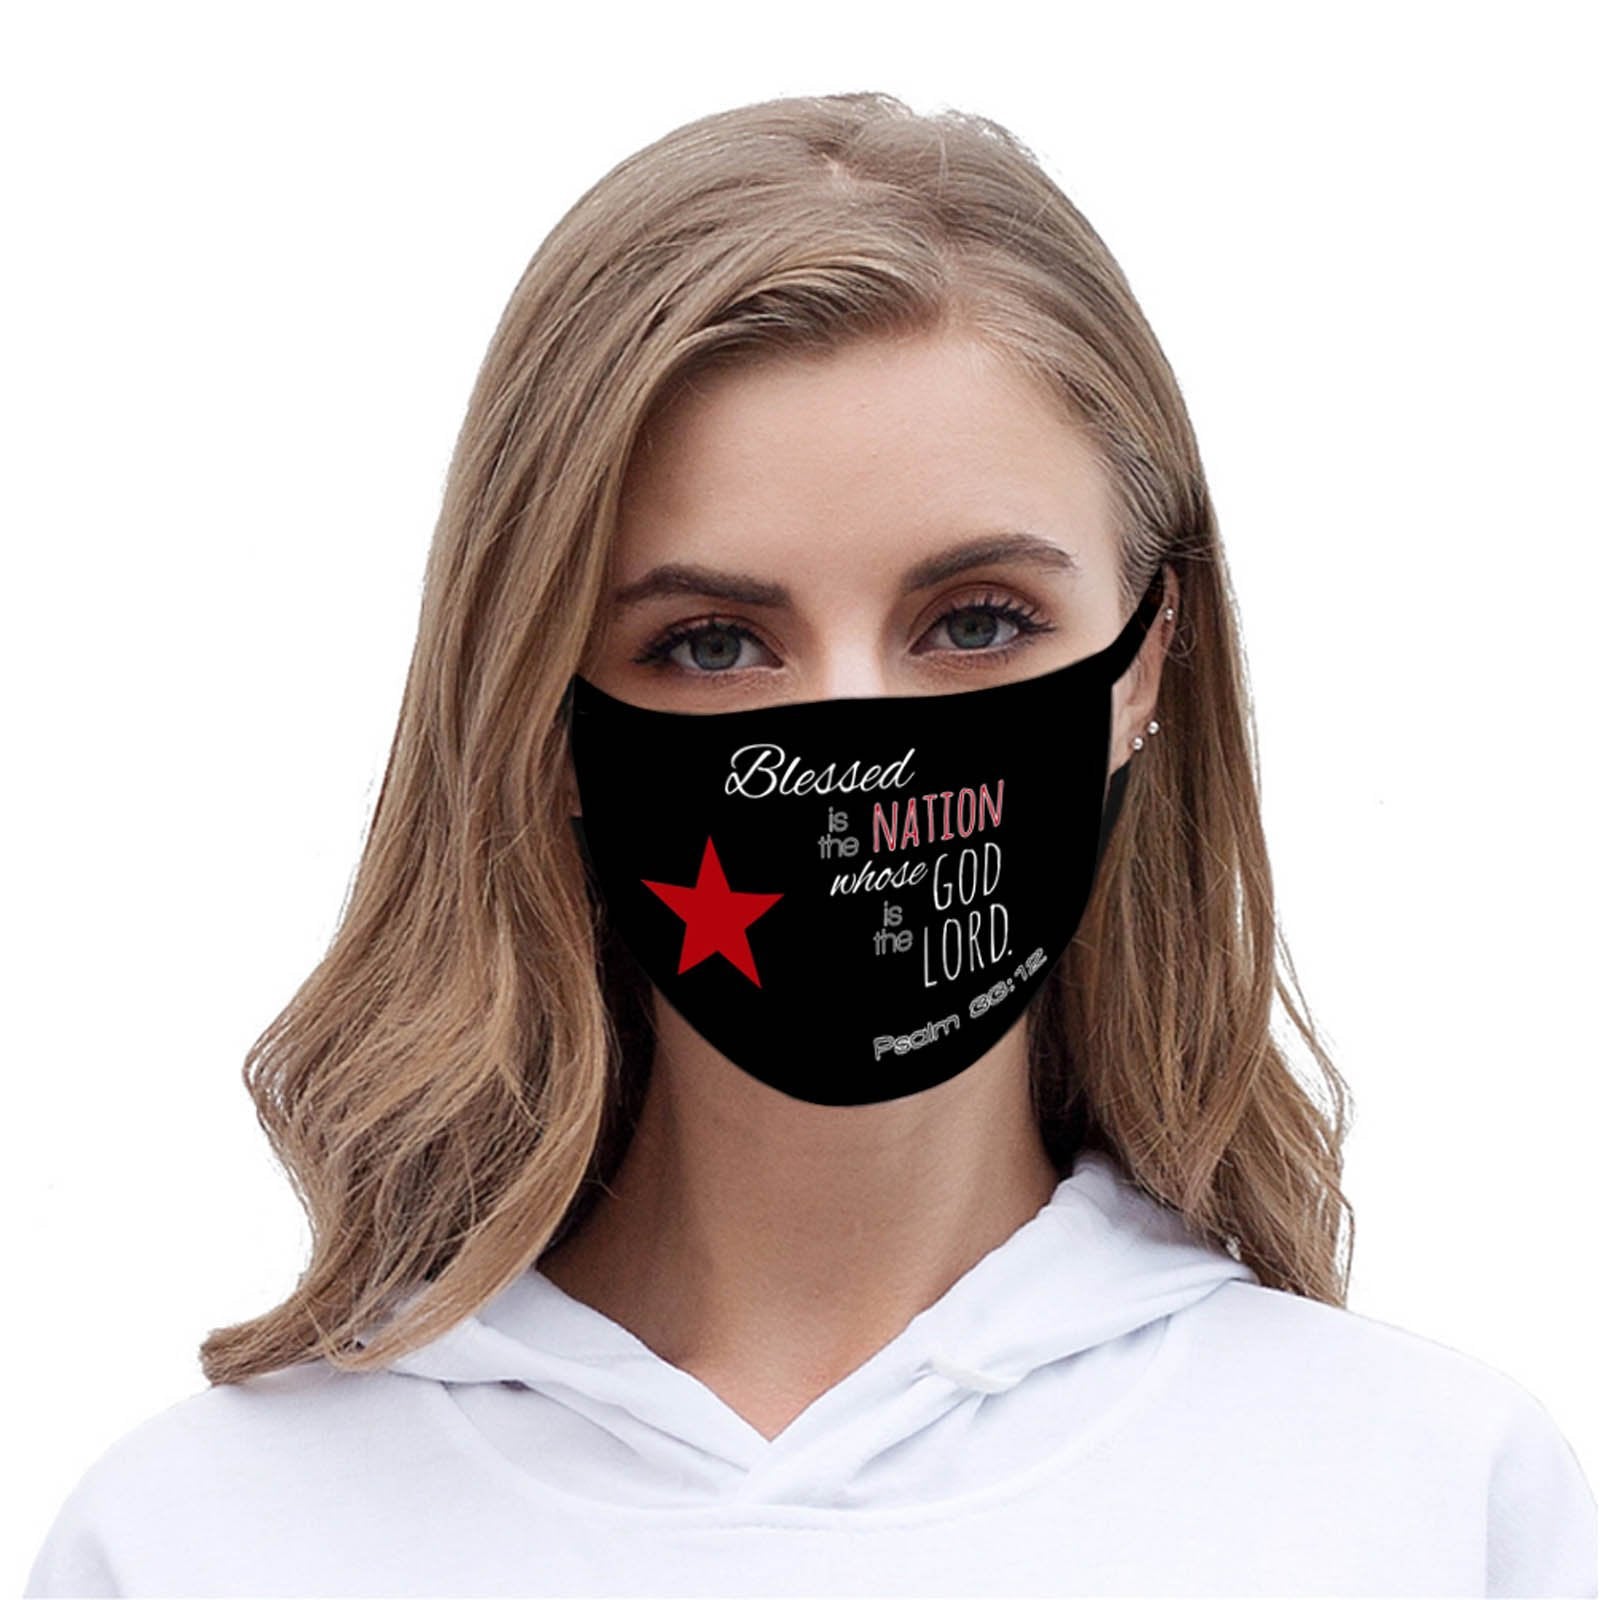 FCM-004  American Bling "Blessed is the Nation Whose God is the Lord "Fabric Face Mask Double Layer Set of 2